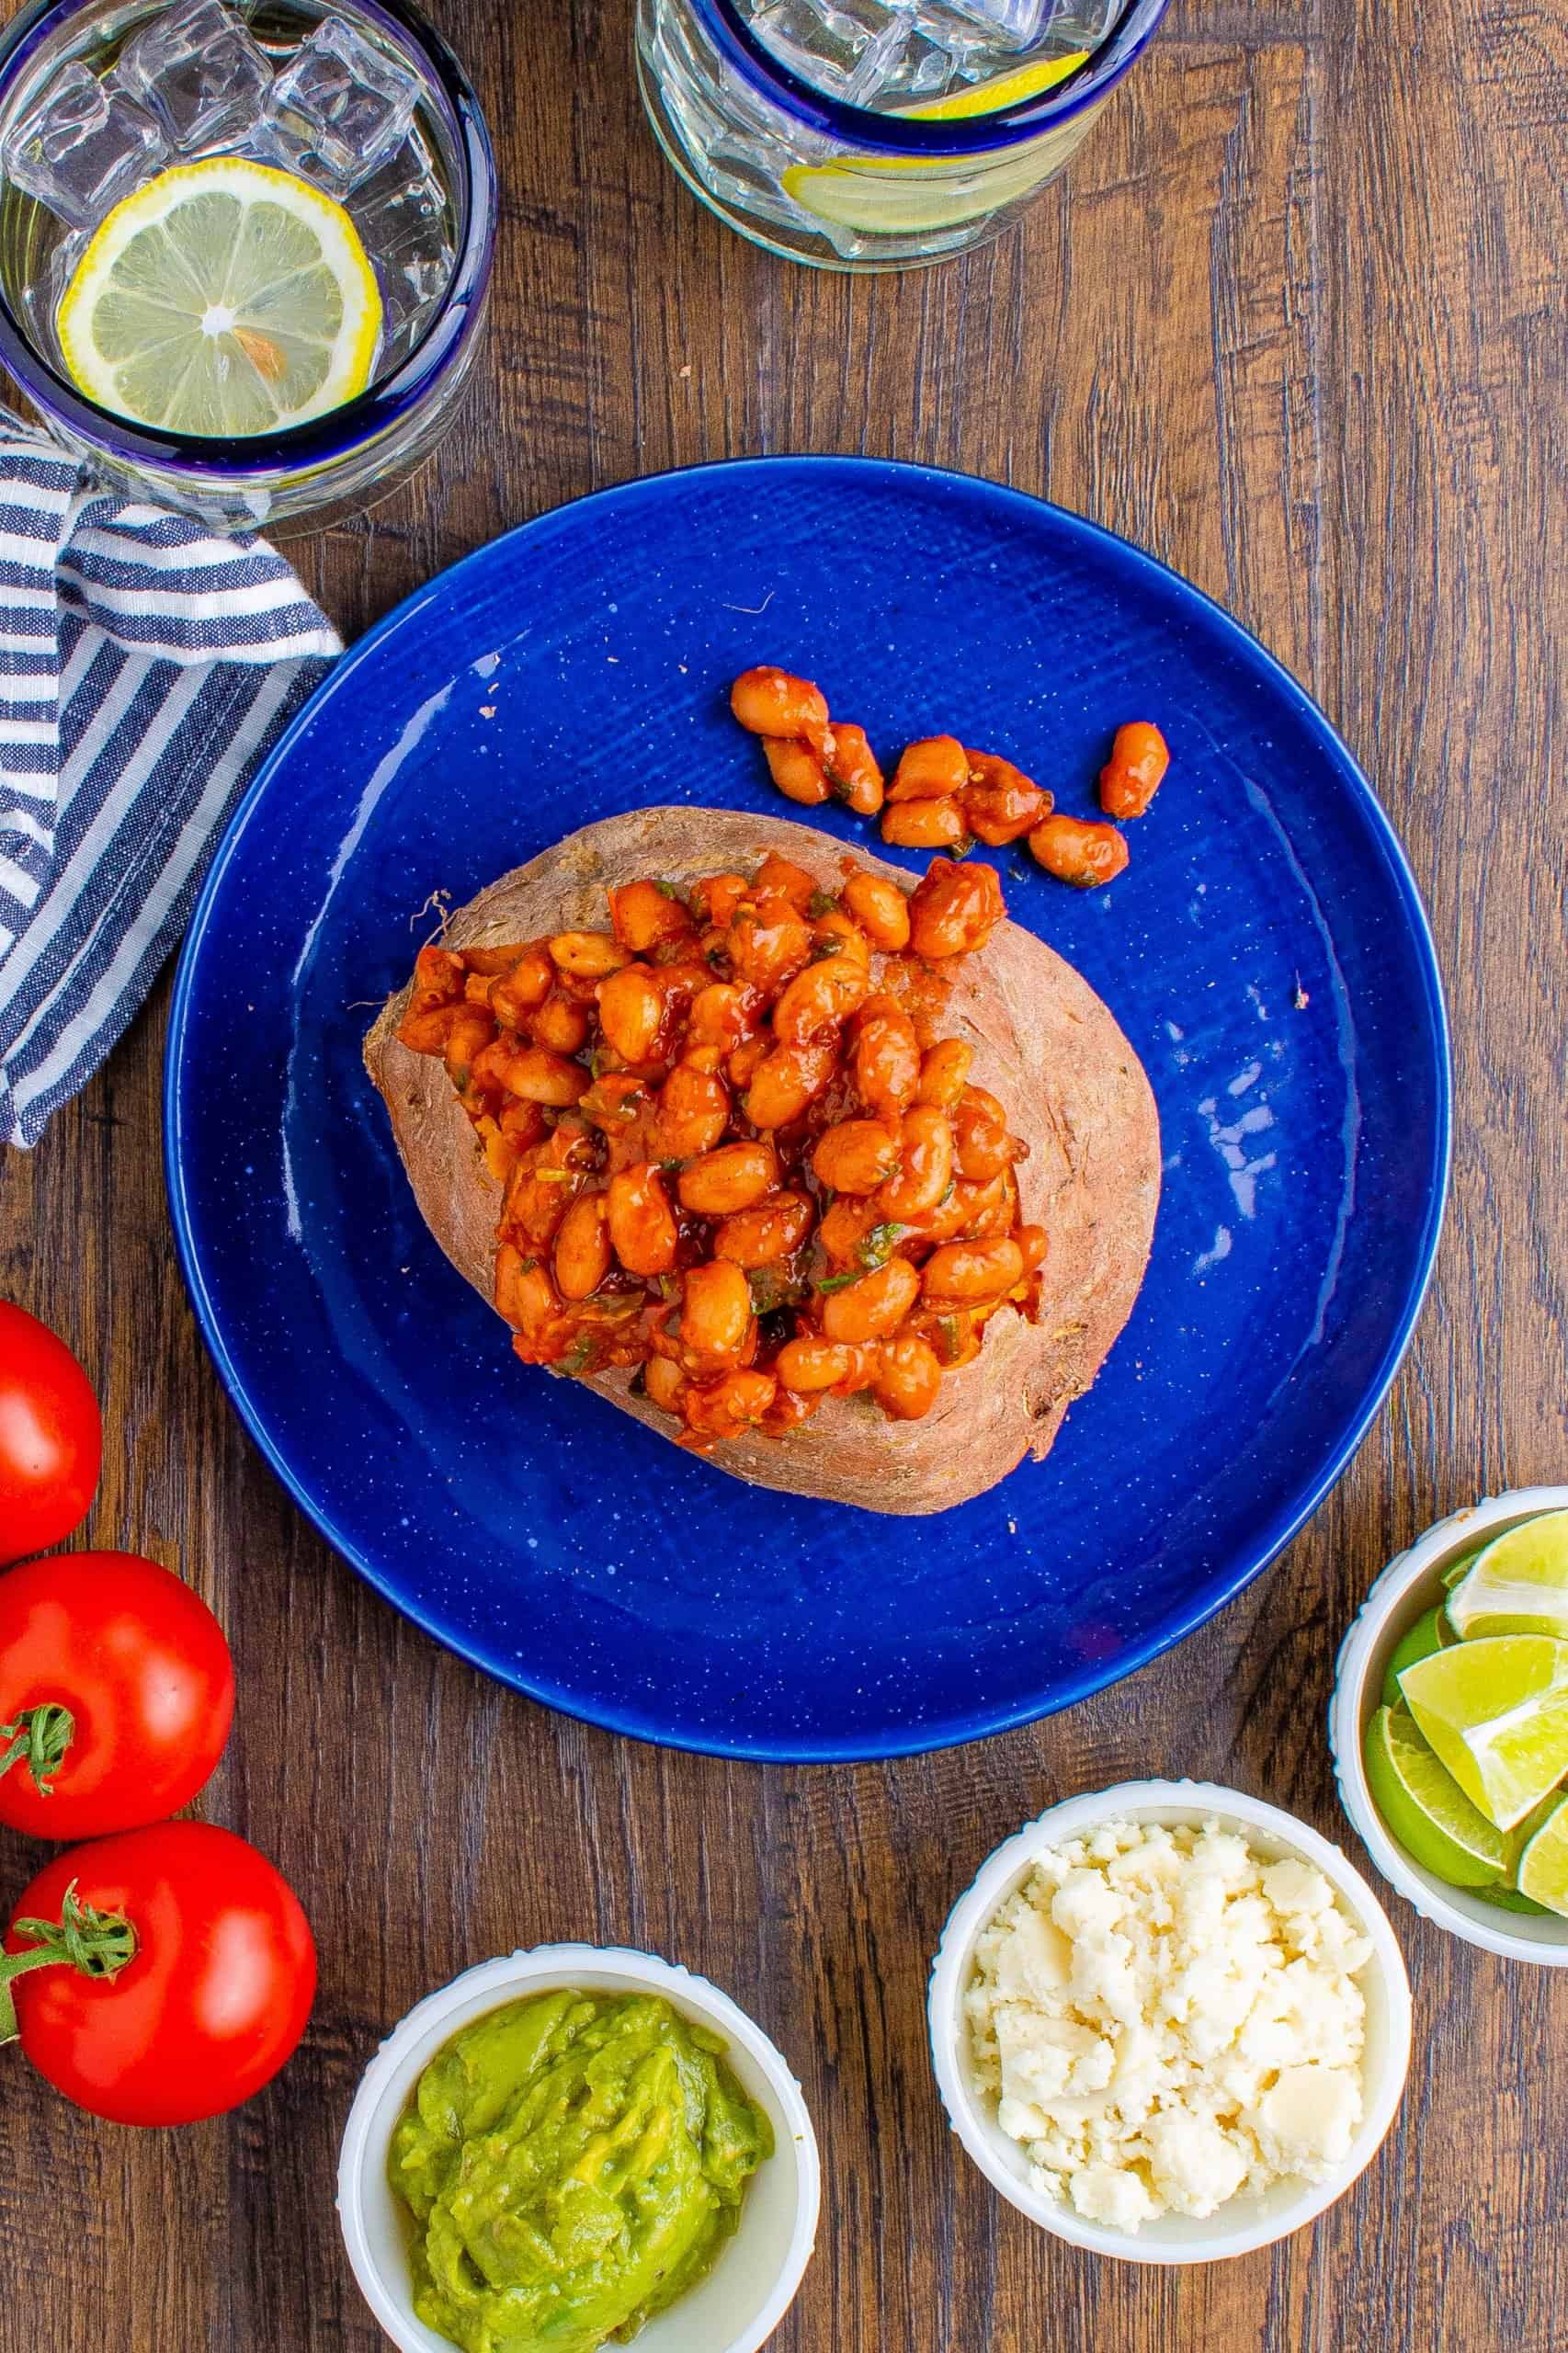 taco seasoned pinto bean mixture added inside cooked sweet potato on a blue plate.